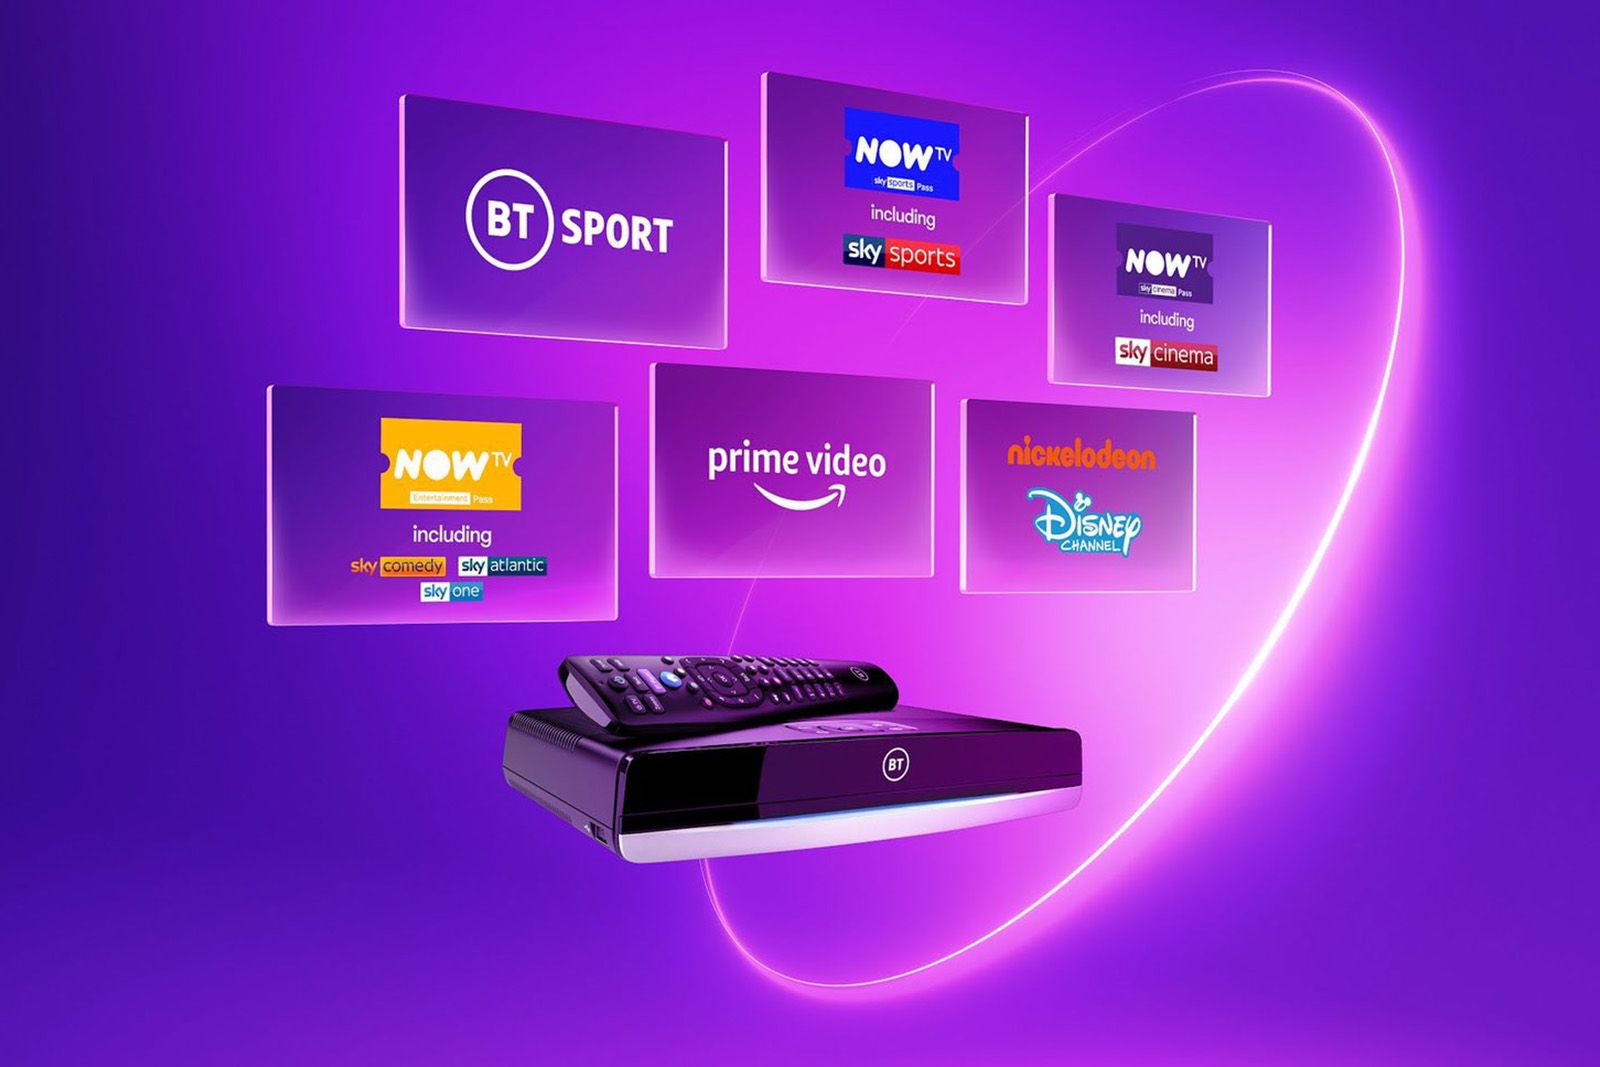 New BT TV packages add Now TV for all of Sky Sports Sky Atlantic Sky Cinema and more image 1